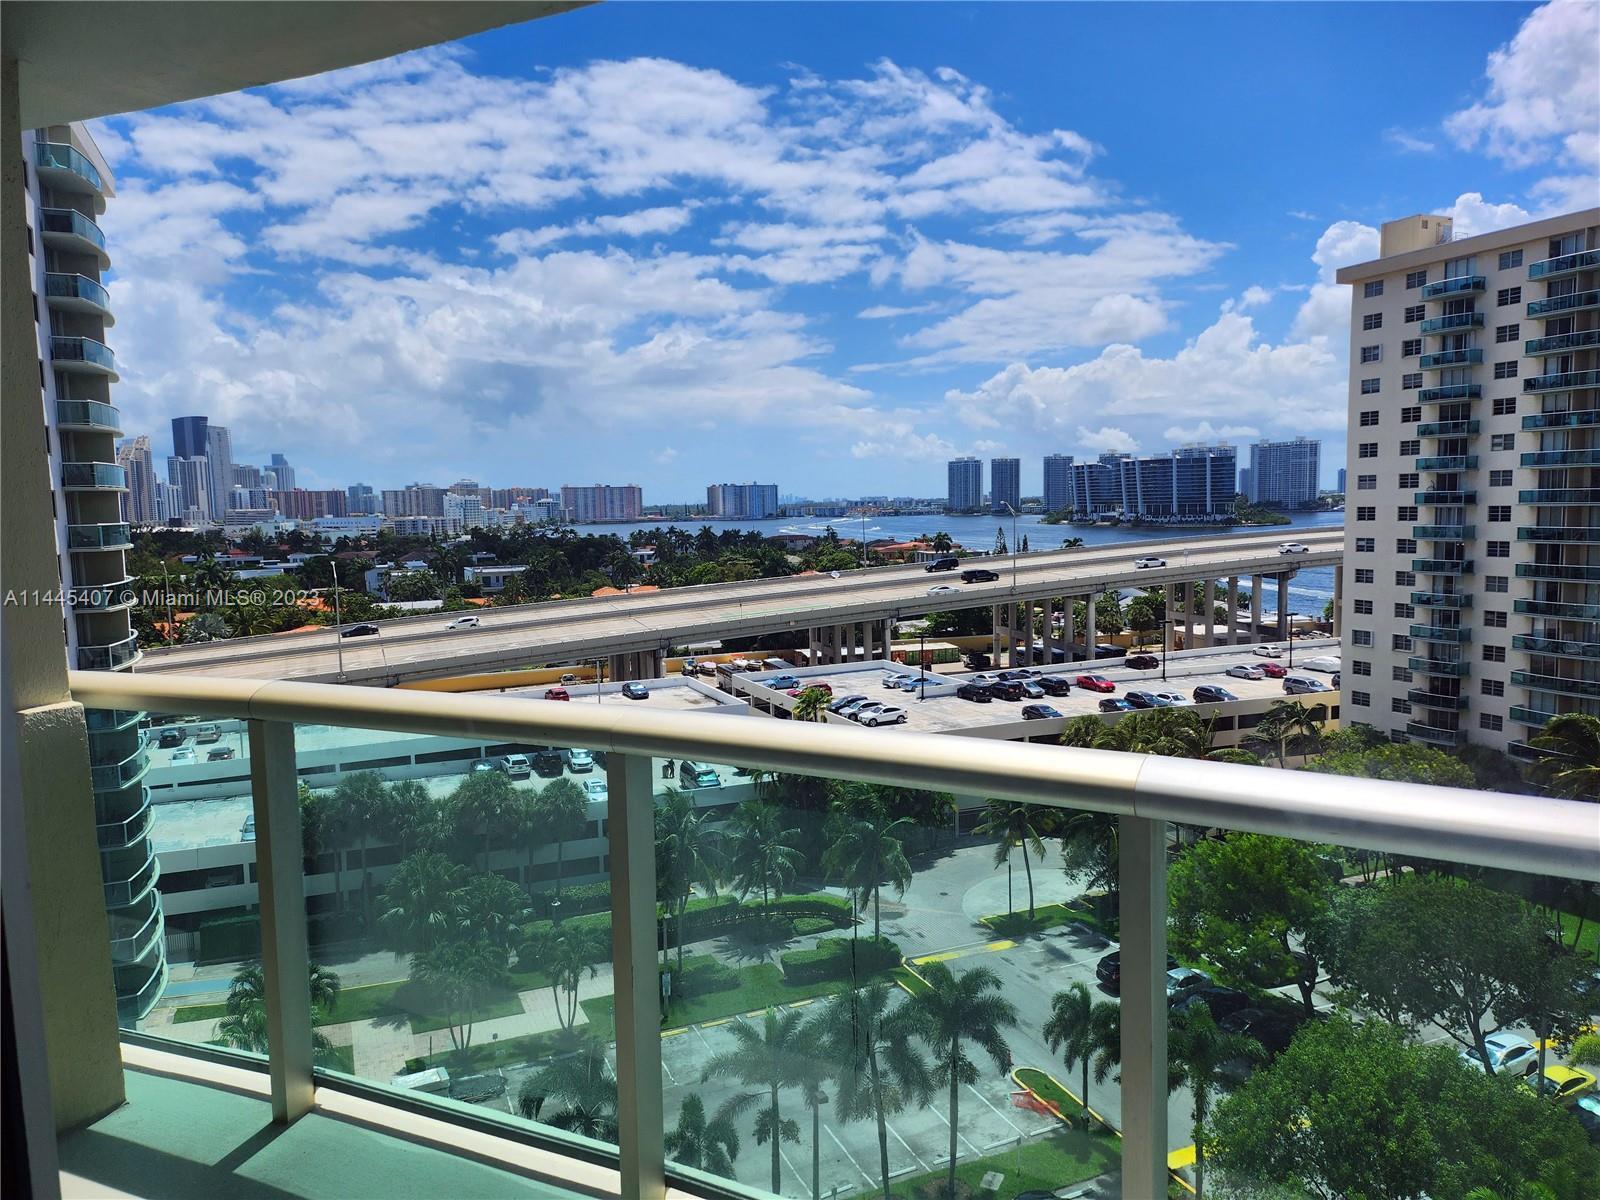 LUXURY LIVING at affordable prices. Luminous unit in the heart of Sunny Isles. Enjoy this 1 bedroom 